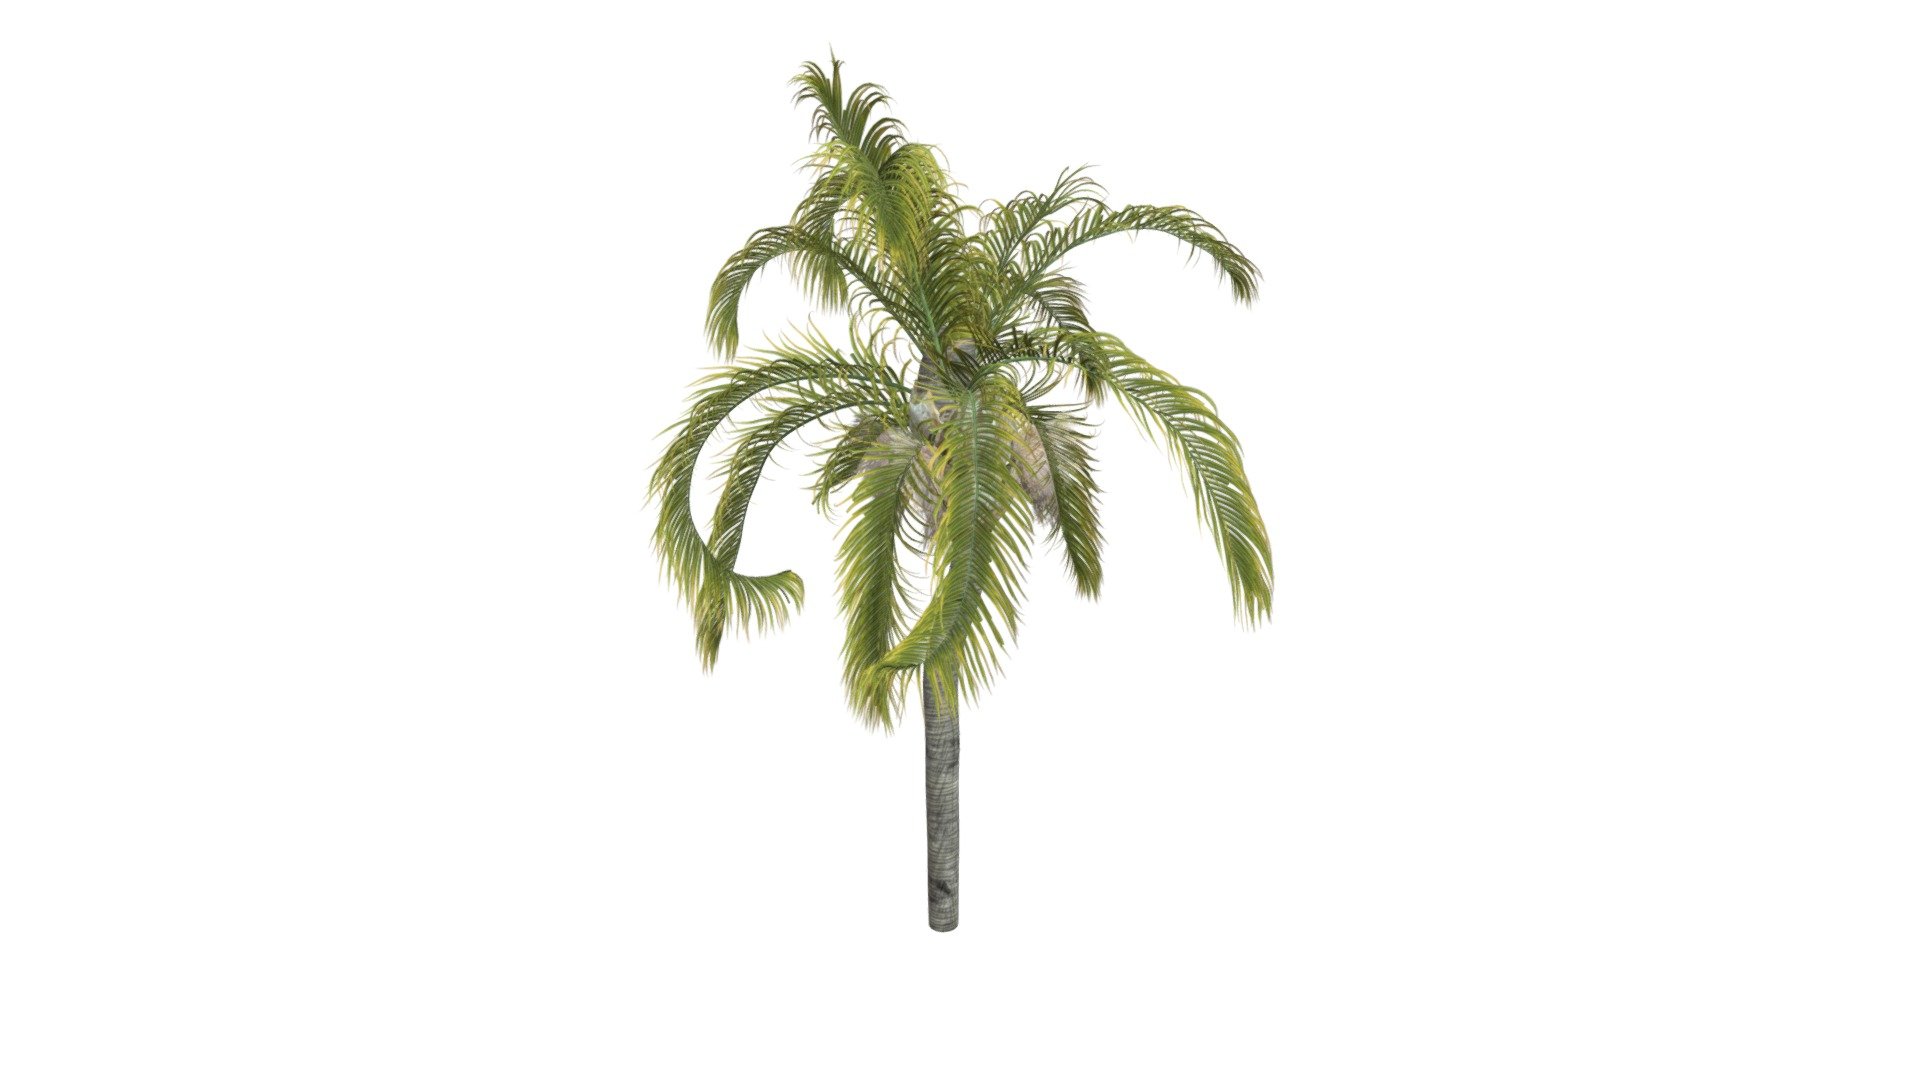 This 3D model of the Queen Palm Tree is a highly detailed and photorealistic option suitable for architectural, landscaping, and video game projects. The model is designed with carefully crafted textures that mimic the natural beauty of a real Queen Palm Tree. Its versatility allows it to bring a touch of realism to any project, whether it’s a small architectural rendering or a large-scale landscape design. Additionally, the model is optimized for performance and features efficient UV mapping. This photorealistic 3D model is the perfect solution for architects, landscapers, and game developers who want to enhance the visual experience of their project with a highly detailed, photorealistic Queen Palm Tree 3d model